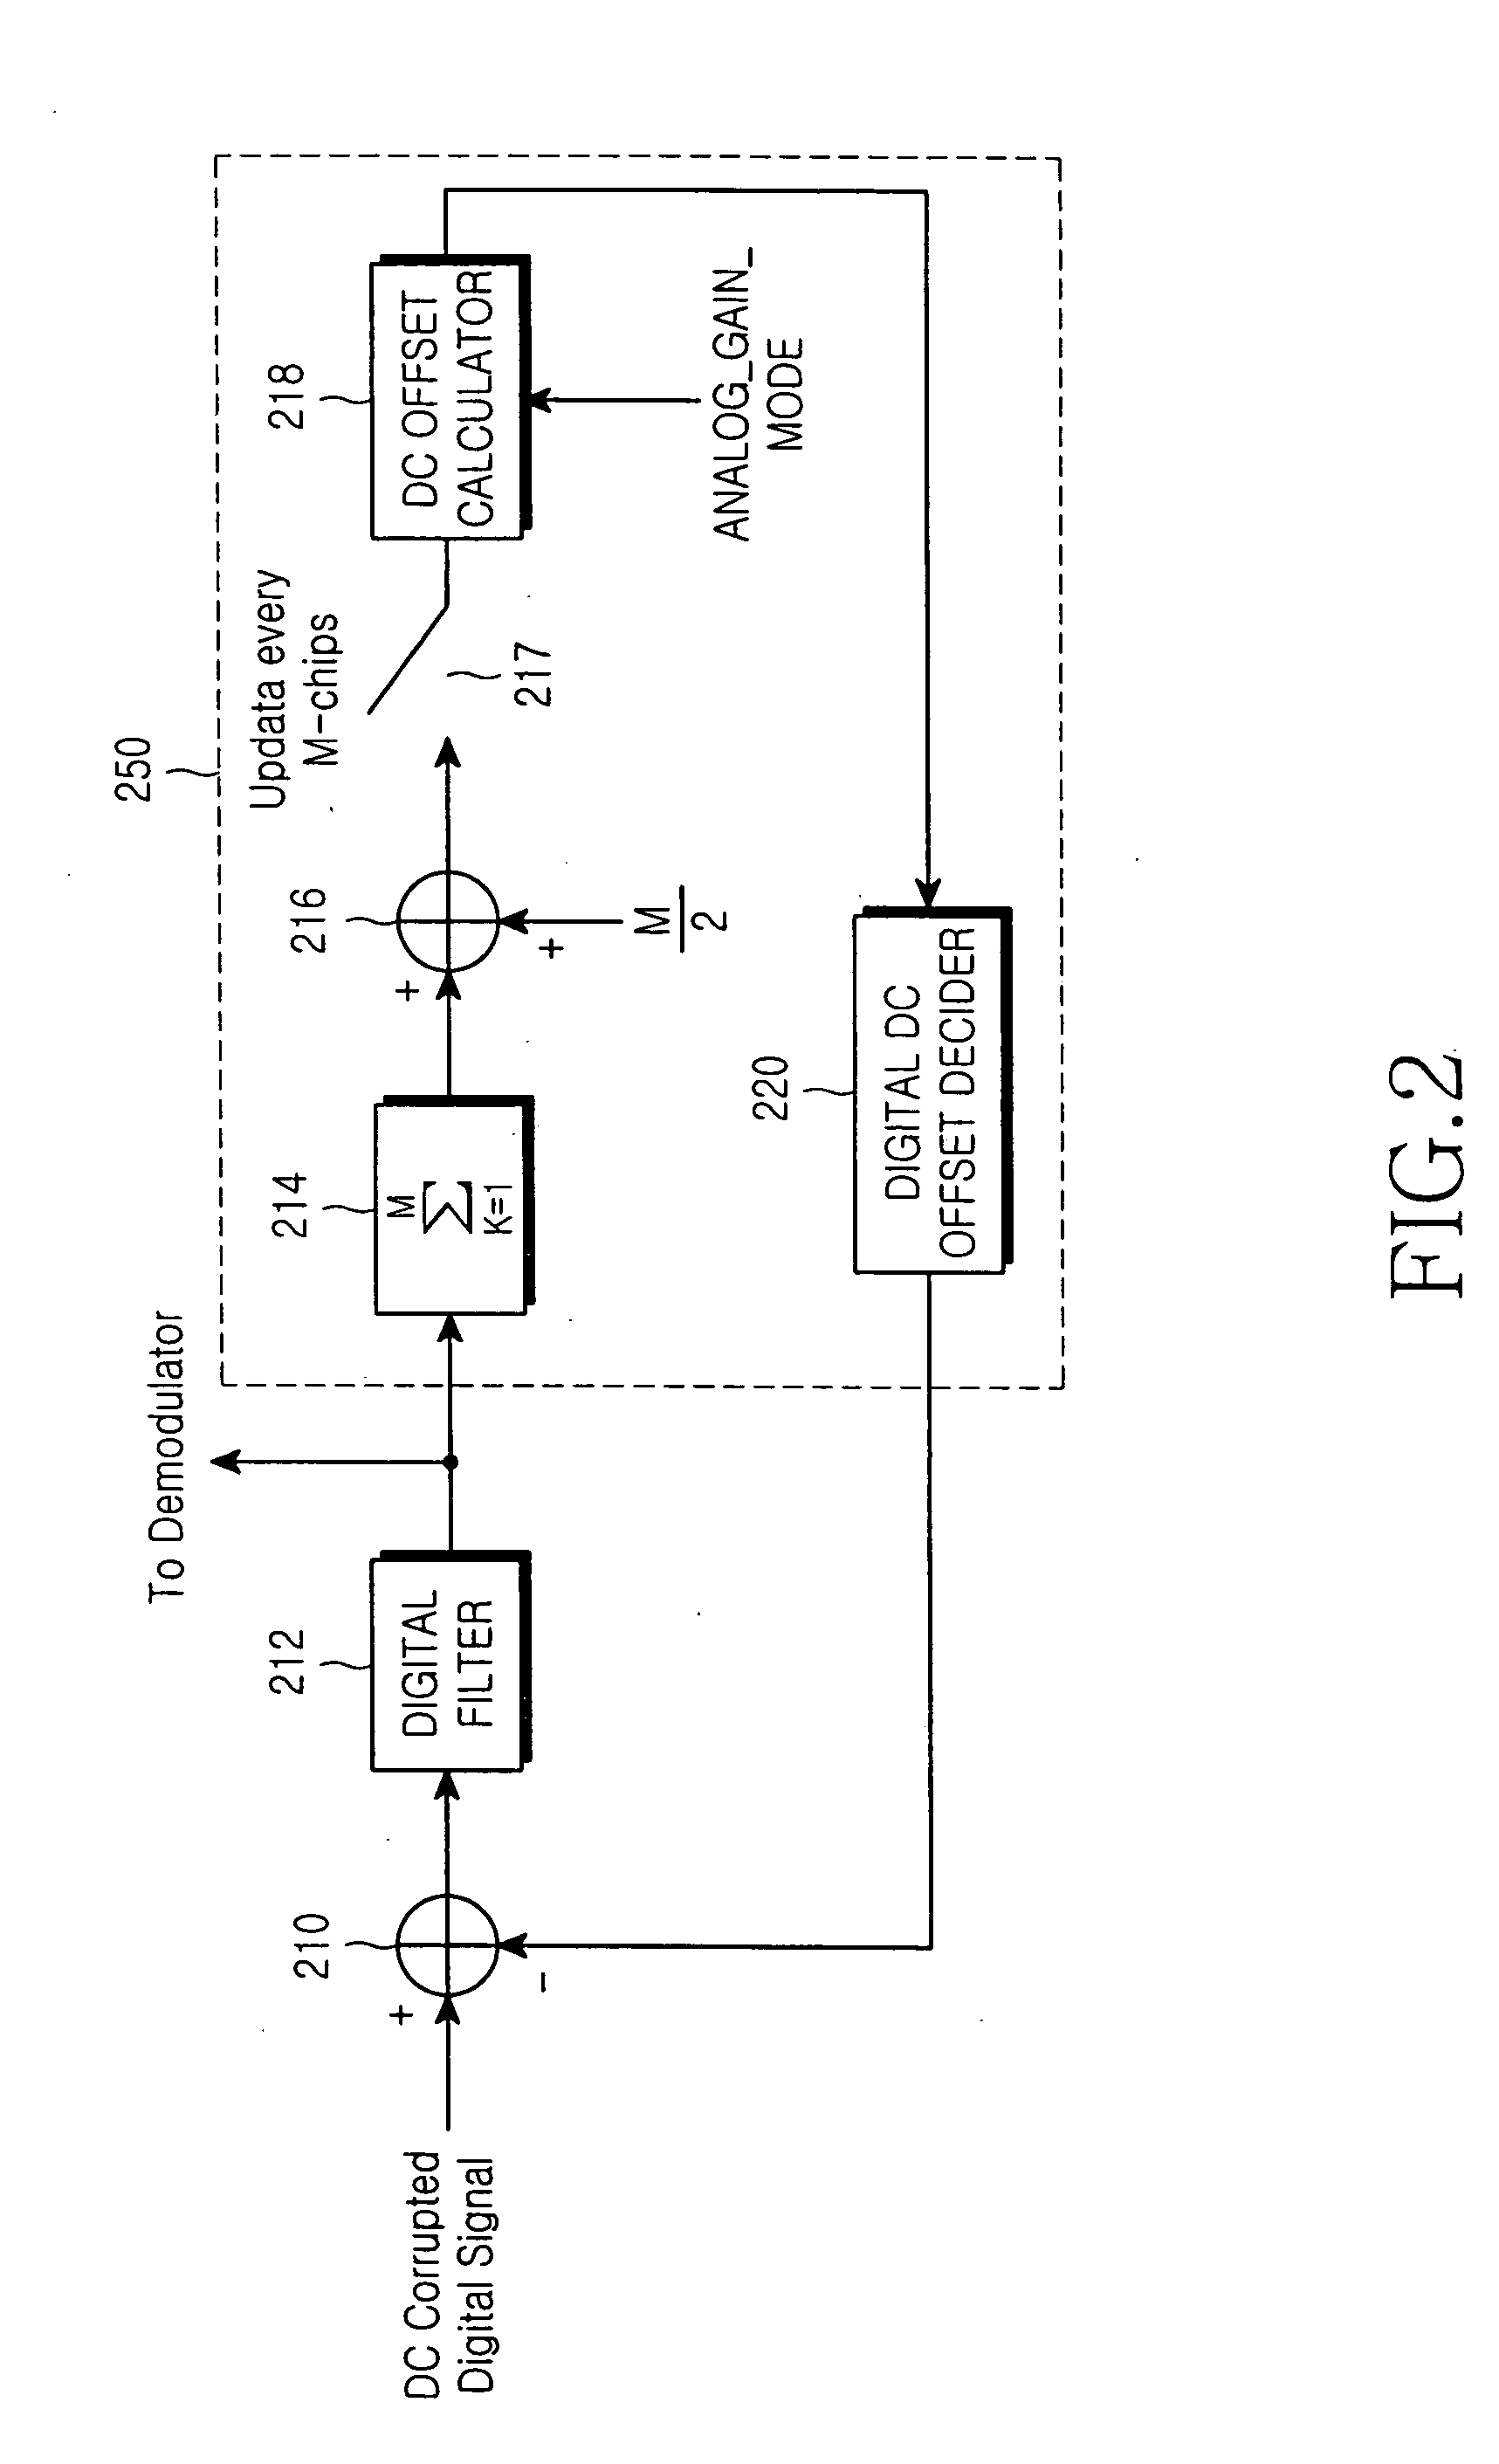 Apparatus and method for removing DC offset in a frequency direct-conversion device